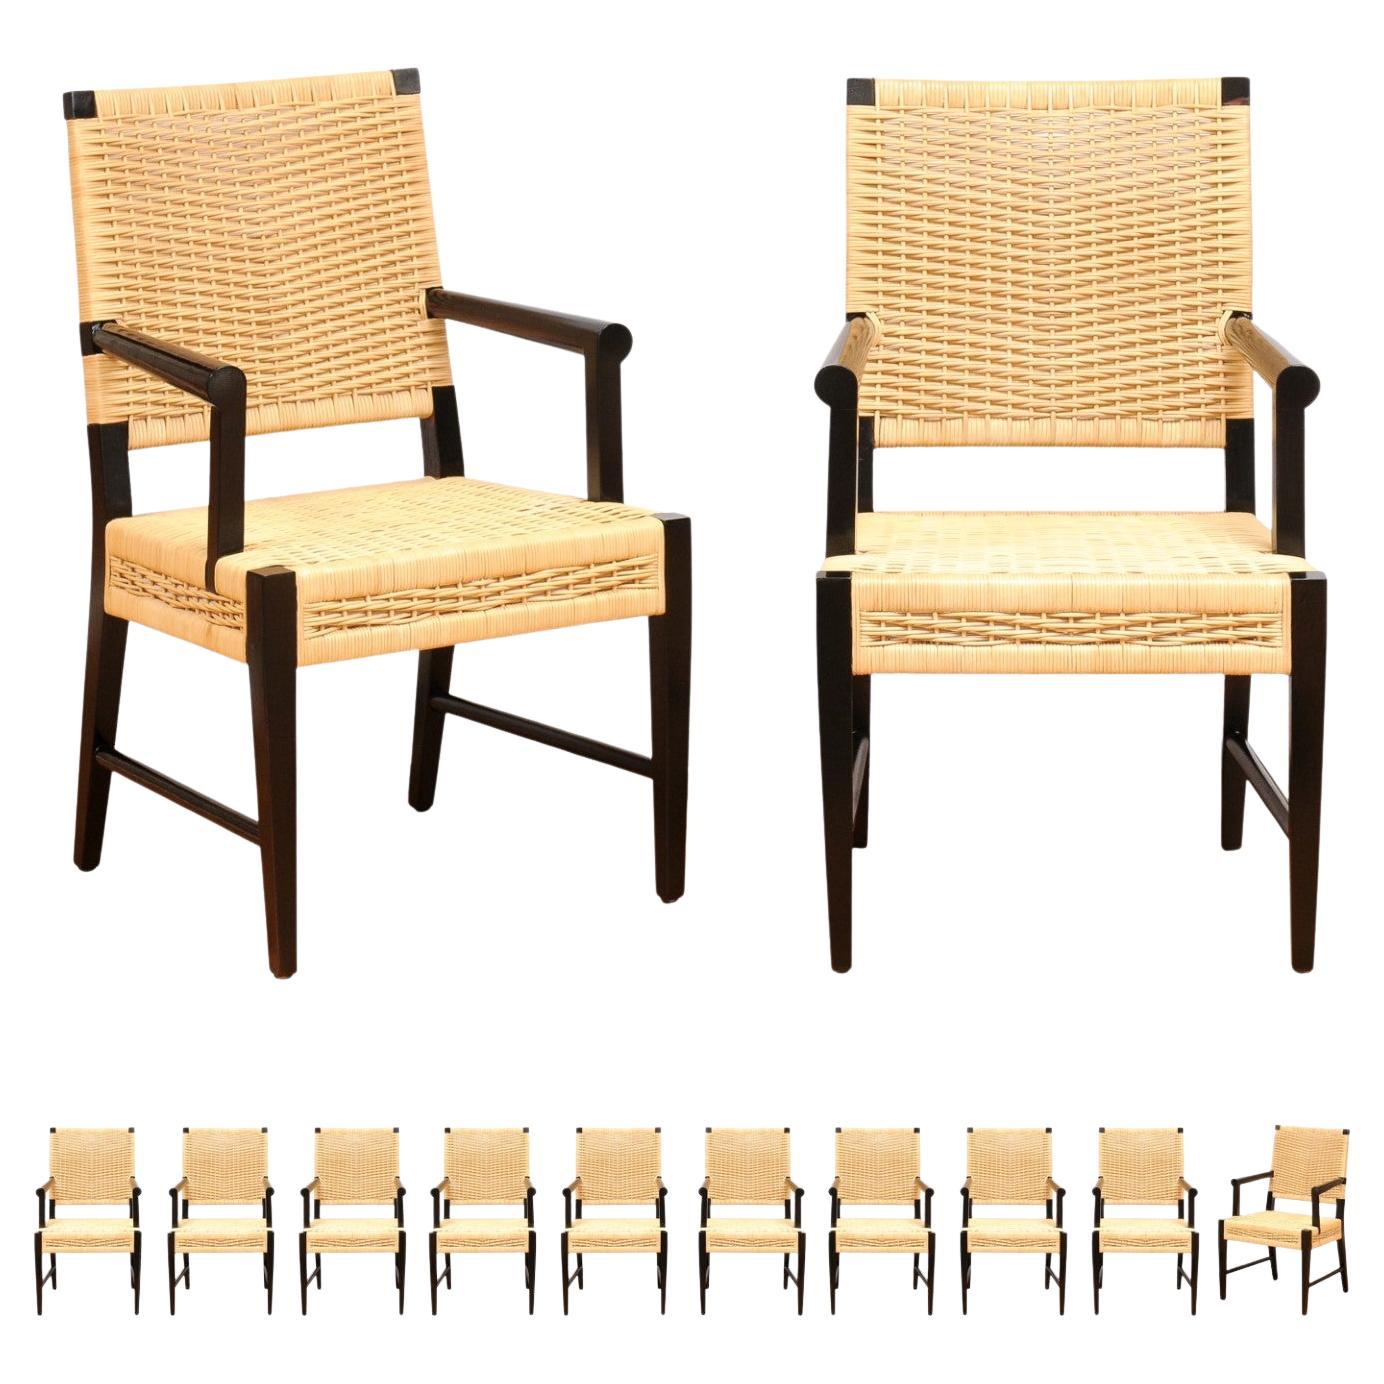 Remarkable Set of 12 Mahogany and Cane Arm Chairs by John Hutton for Donghia For Sale